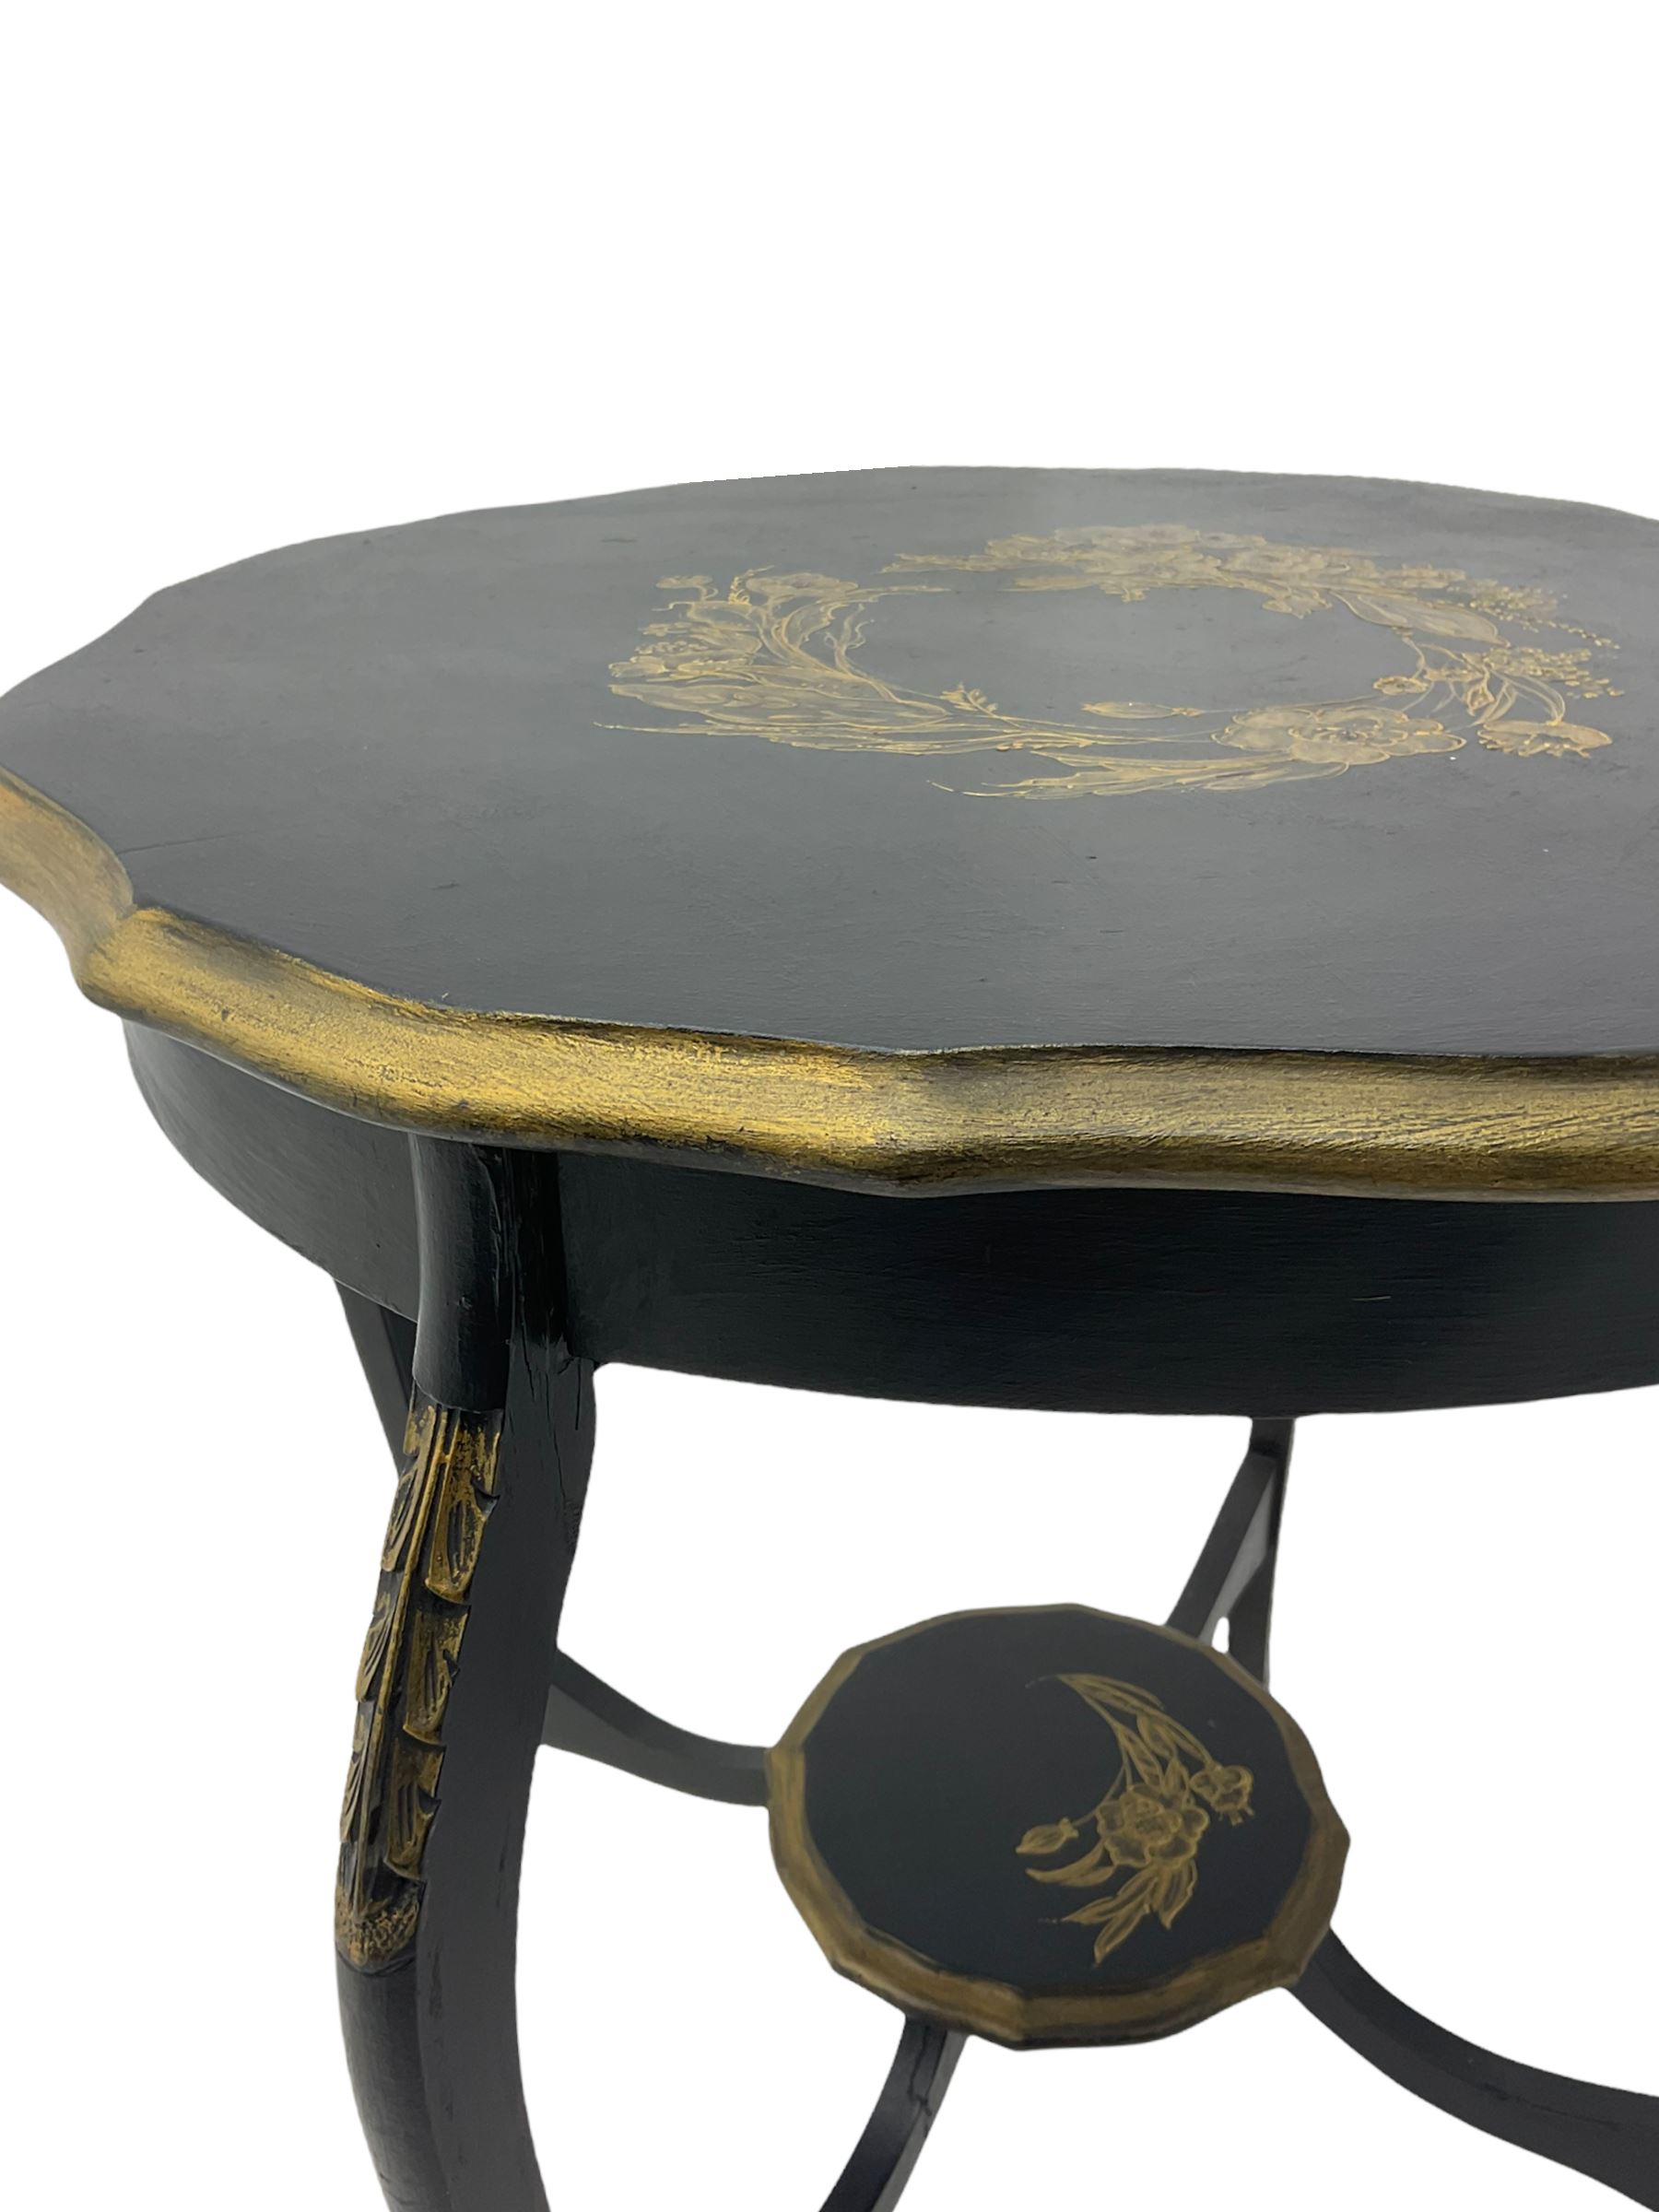 Early 20th century black painted and gilded centre table - Image 9 of 11